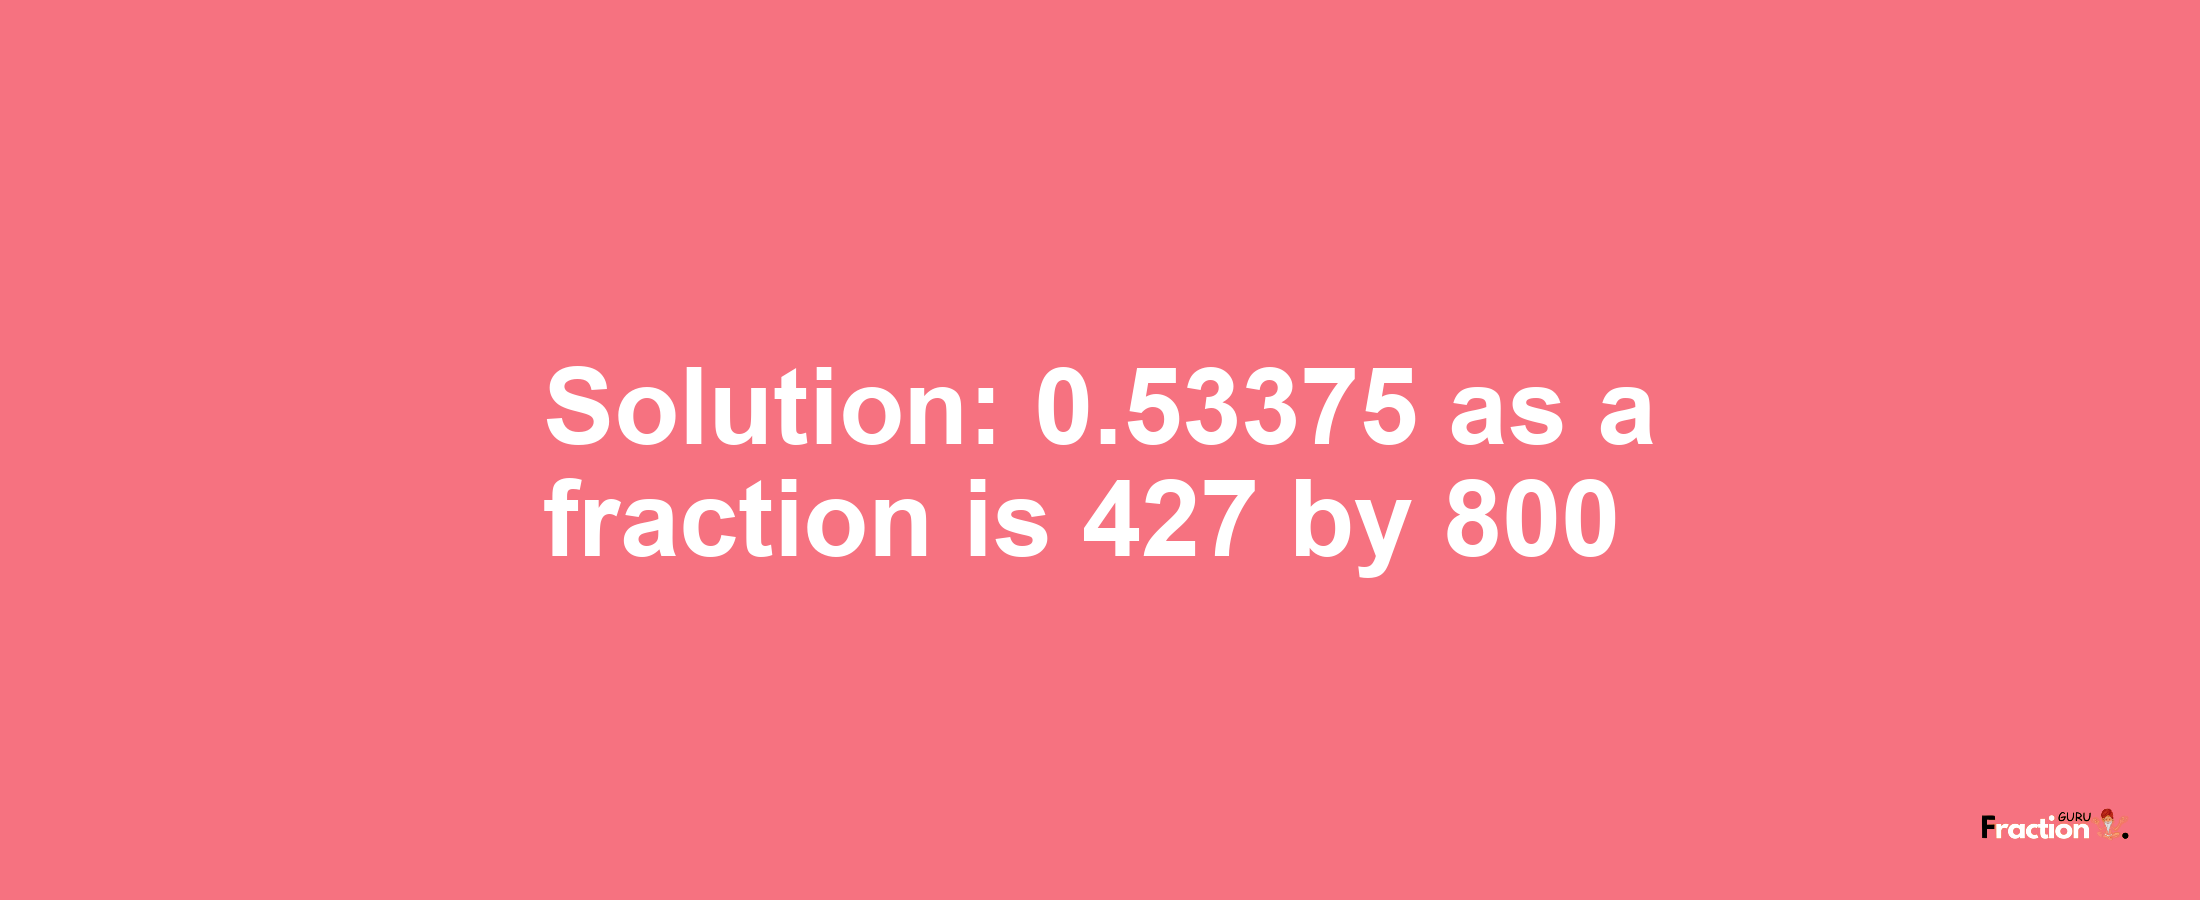 Solution:0.53375 as a fraction is 427/800